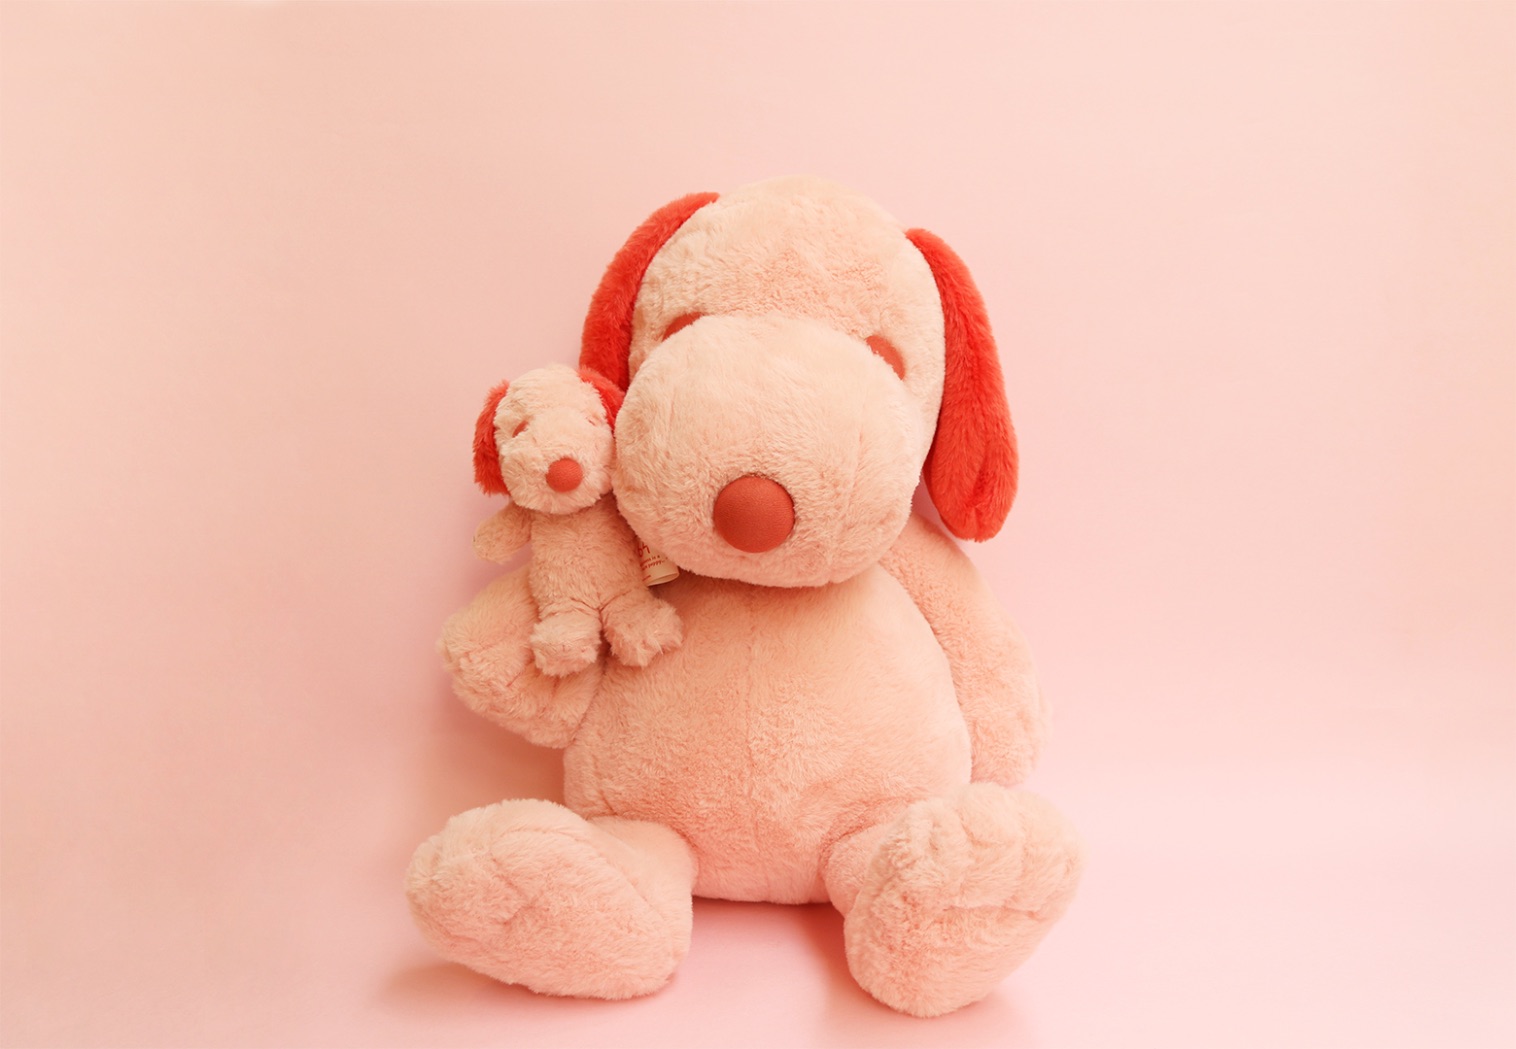 Snoopy Handmade Plush Doll Pink L size PEANUTS CAFE Original from Japan 